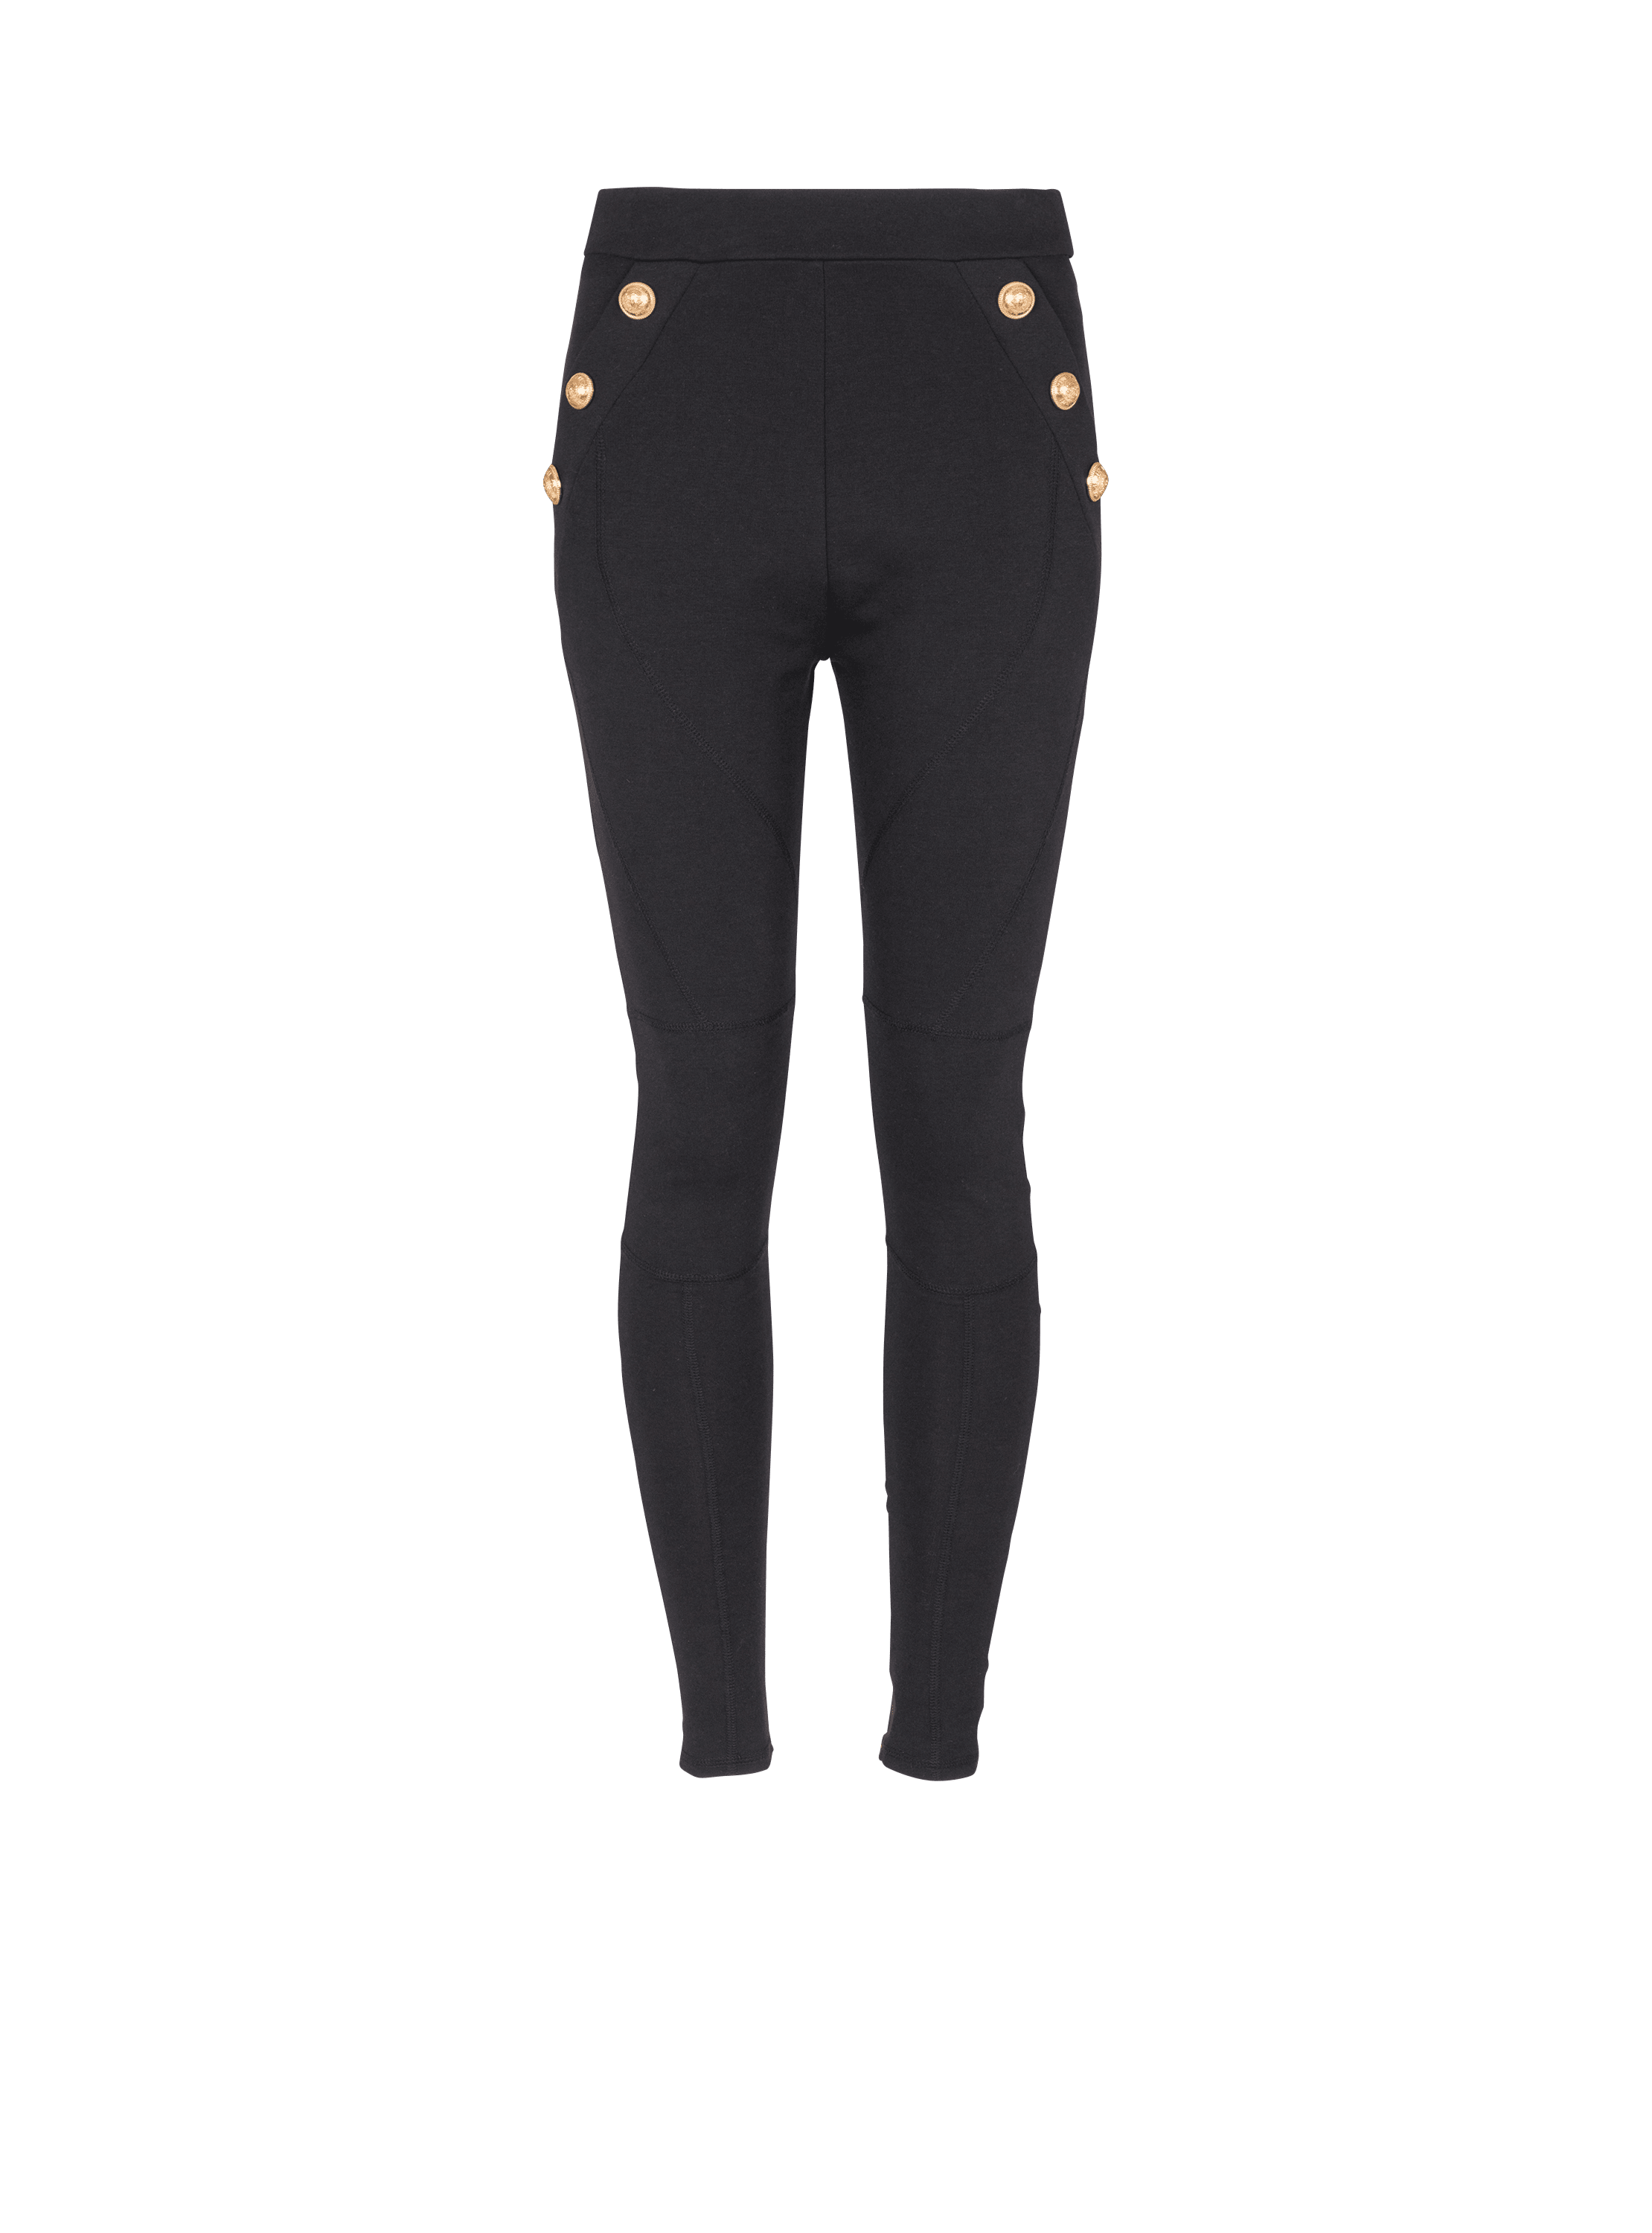 Knit leggings with 6 buttons black - Women